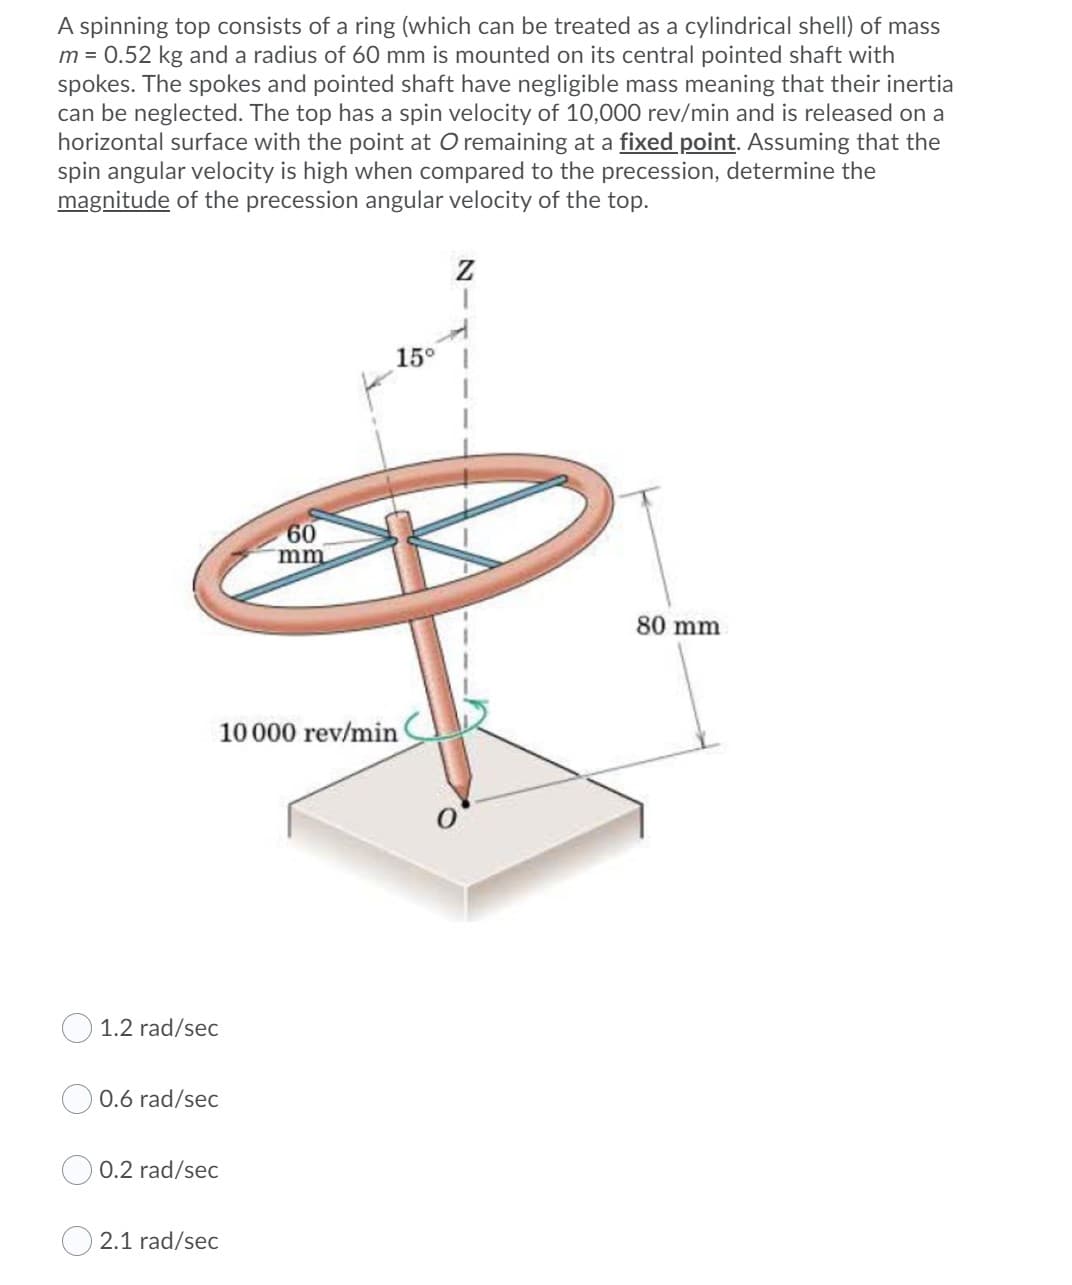 A spinning top consists of a ring (which can be treated as a cylindrical shell) of mass
m = 0.52 kg and a radius of 60 mm is mounted on its central pointed shaft with
spokes. The spokes and pointed shaft have negligible mass meaning that their inertia
can be neglected. The top has a spin velocity of 10,000 rev/min and is released on a
horizontal surface with the point at O remaining at a fixed point. Assuming that the
spin angular velocity is high when compared to the precession, determine the
magnitude of the precession angular velocity of the top.
15°
60
mm
80 mm
10000 rev/min
O 1.2 rad/sec
0.6 rad/sec
0.2 rad/sec
2.1 rad/sec
